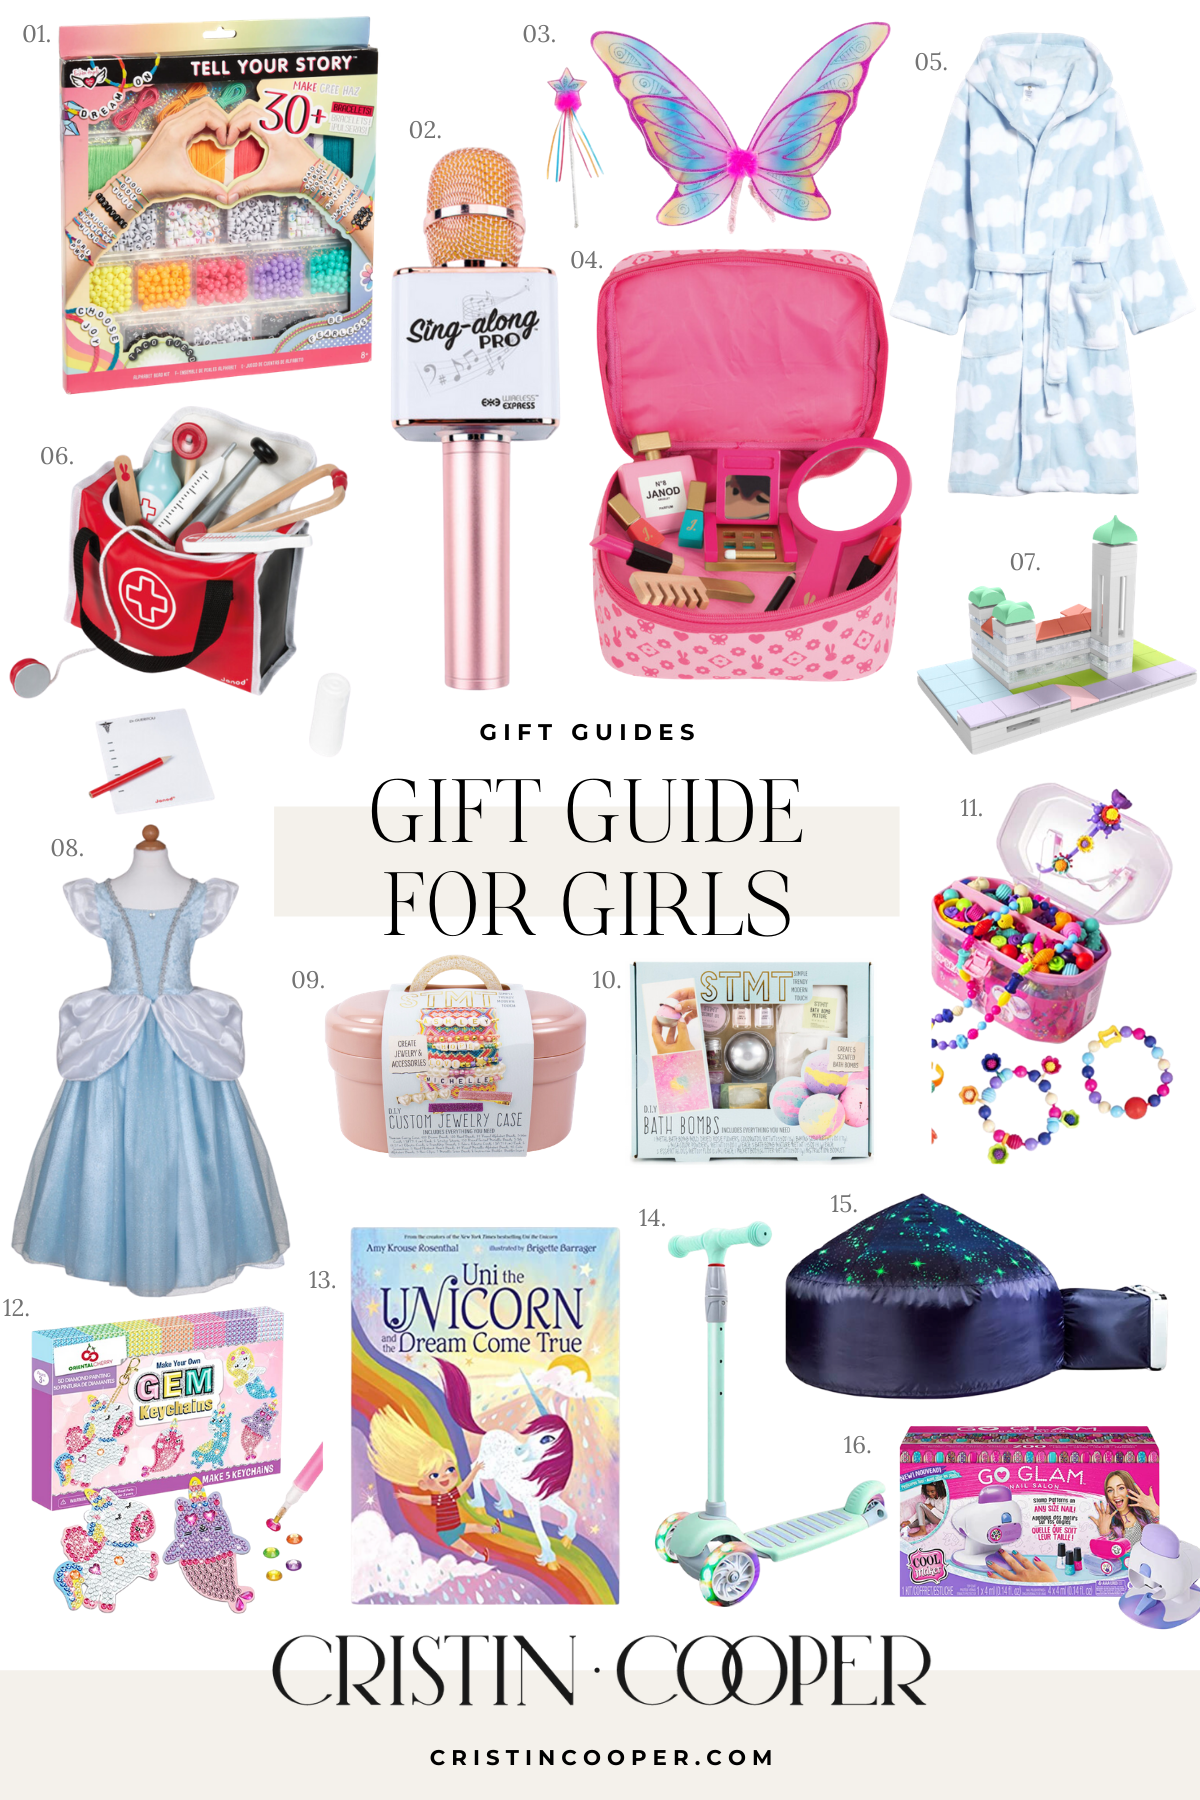 Gifts for Girls